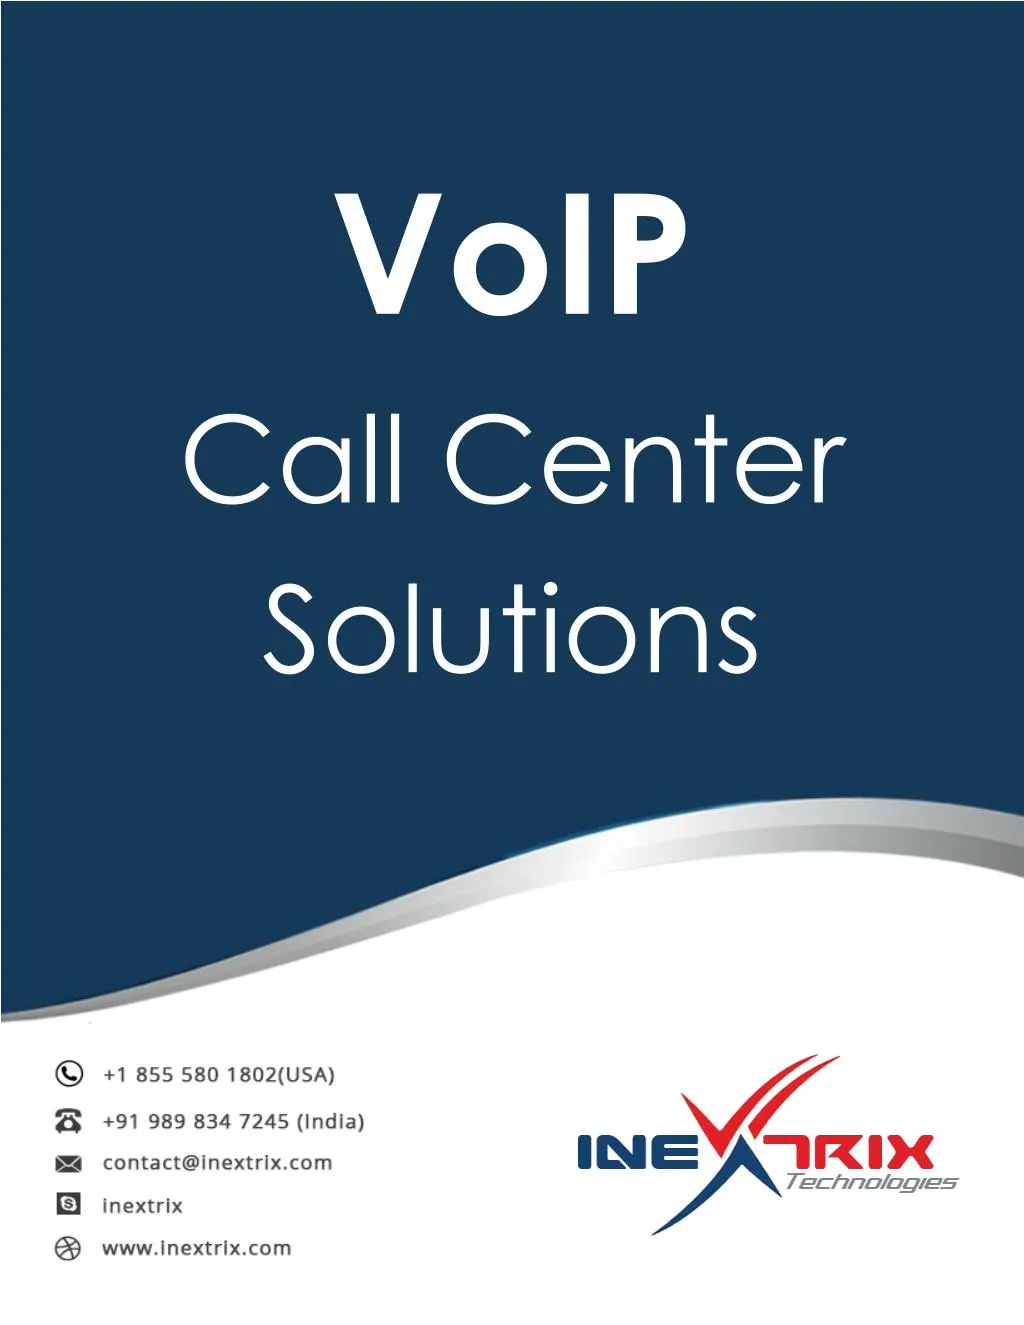 voip call center solutions